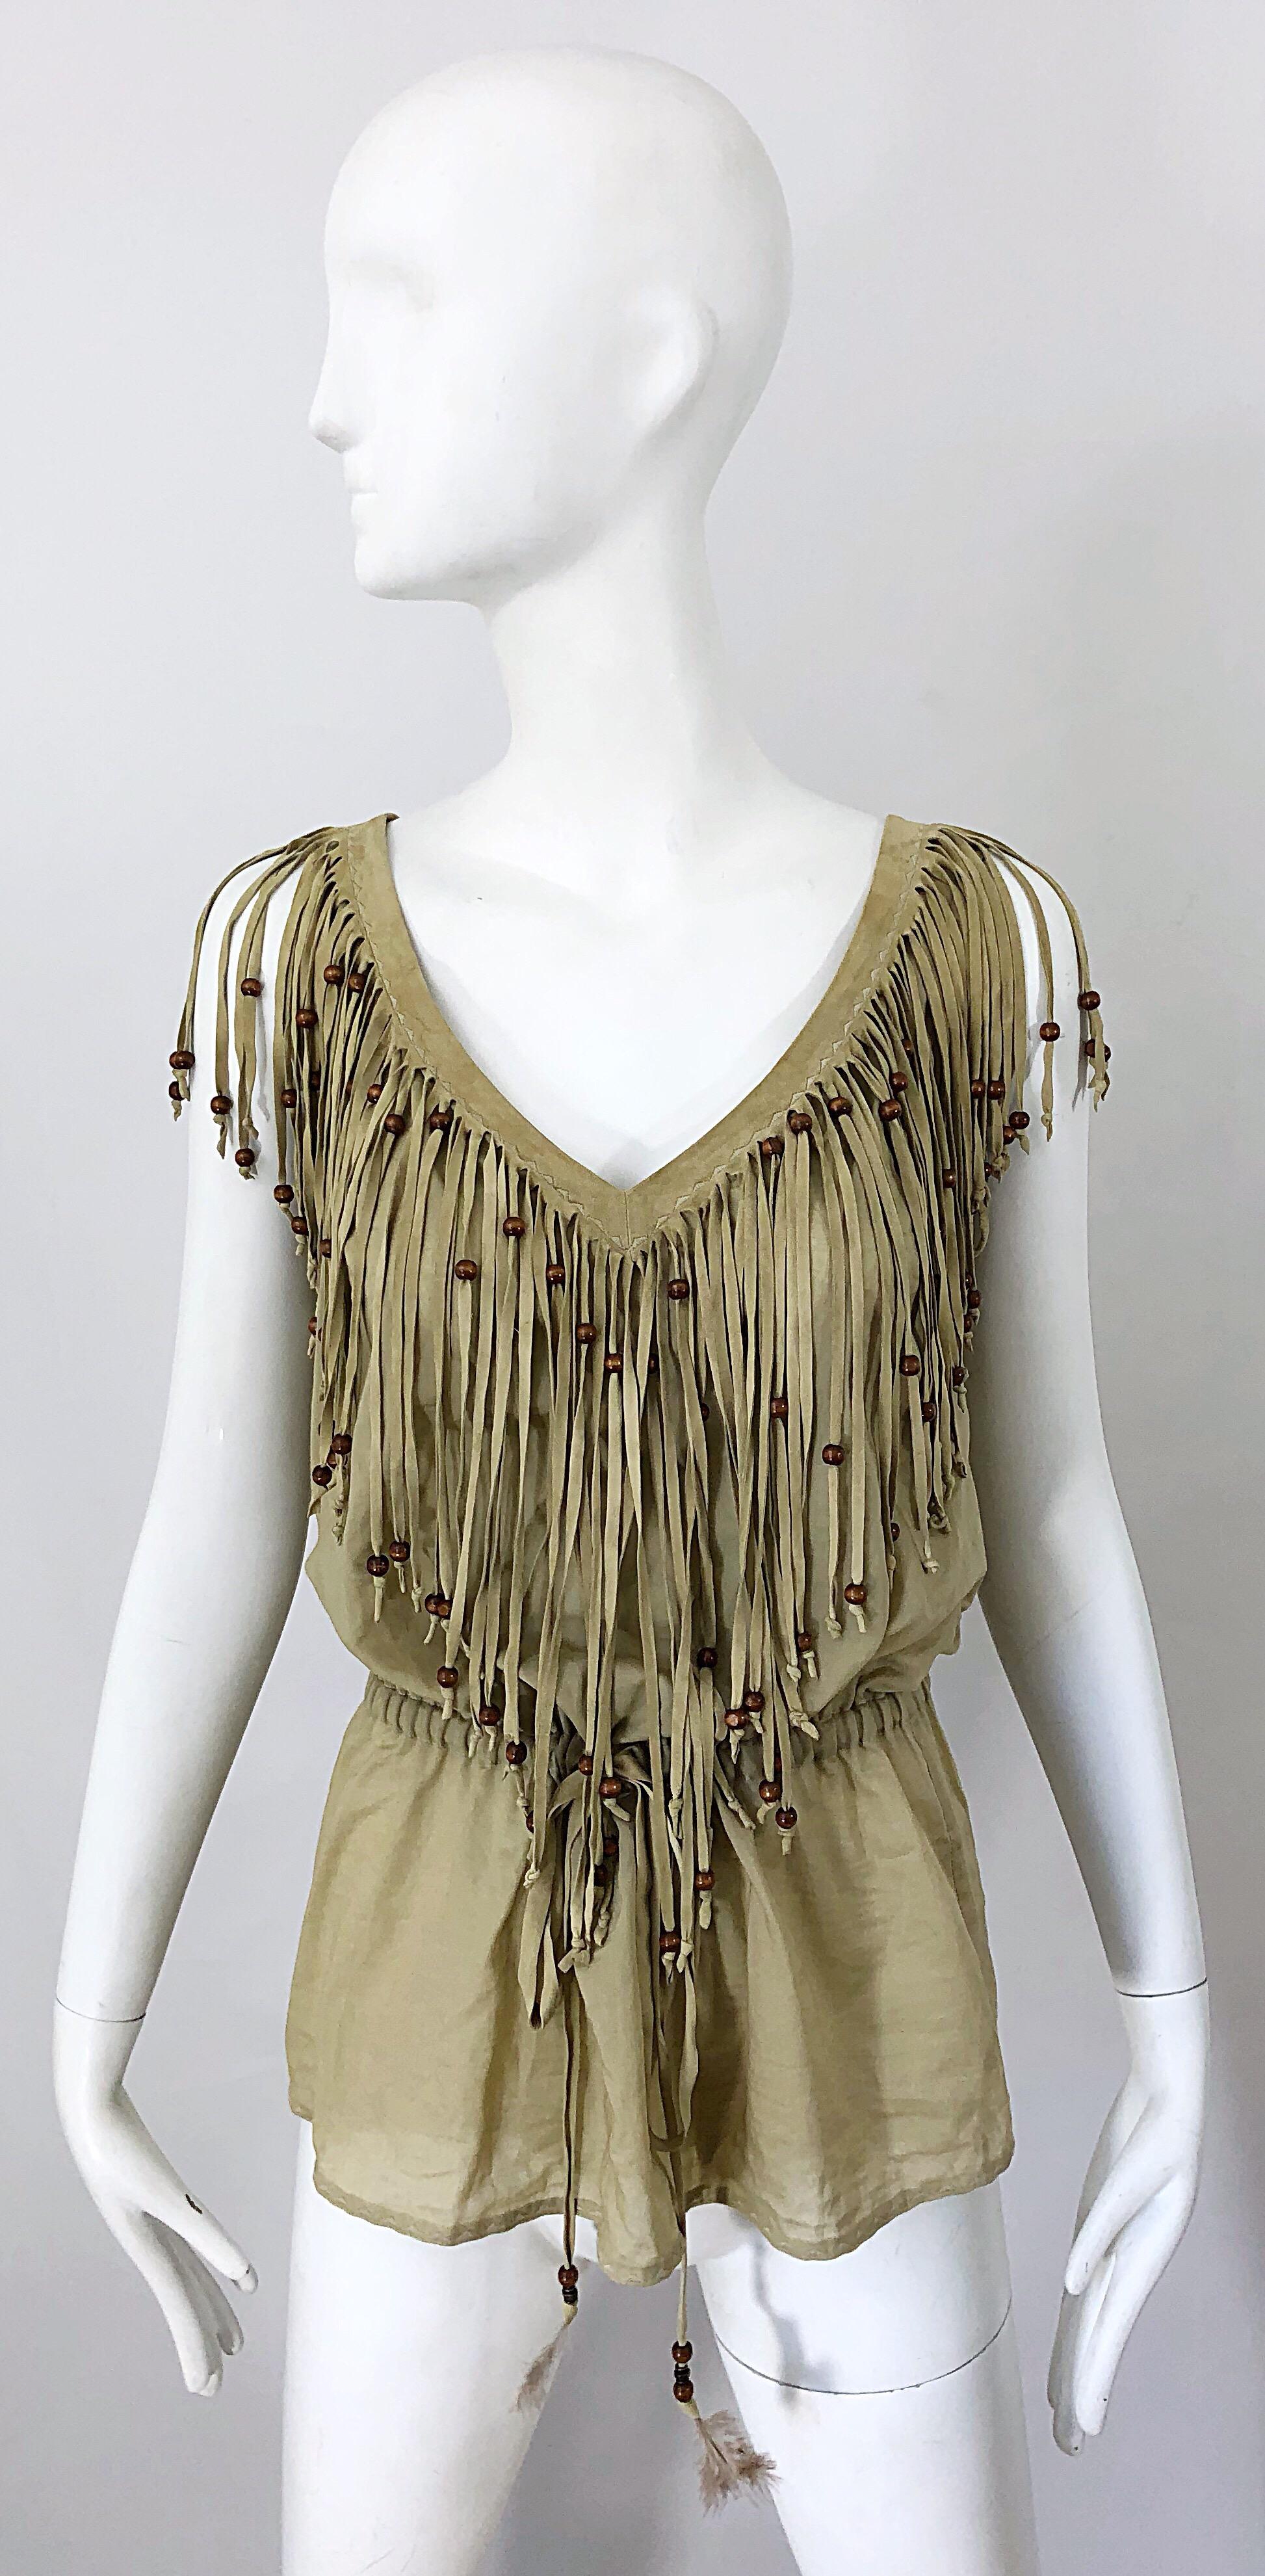 Amazing late 90s vintage DOLCE & GABBANA khaki / brown cotton and suede beaded fringe boho shirt ! Features a flattering drawstring waist that can adjust to fit an array of sizes. Lightweight cotton with suede leather edge along the front and back